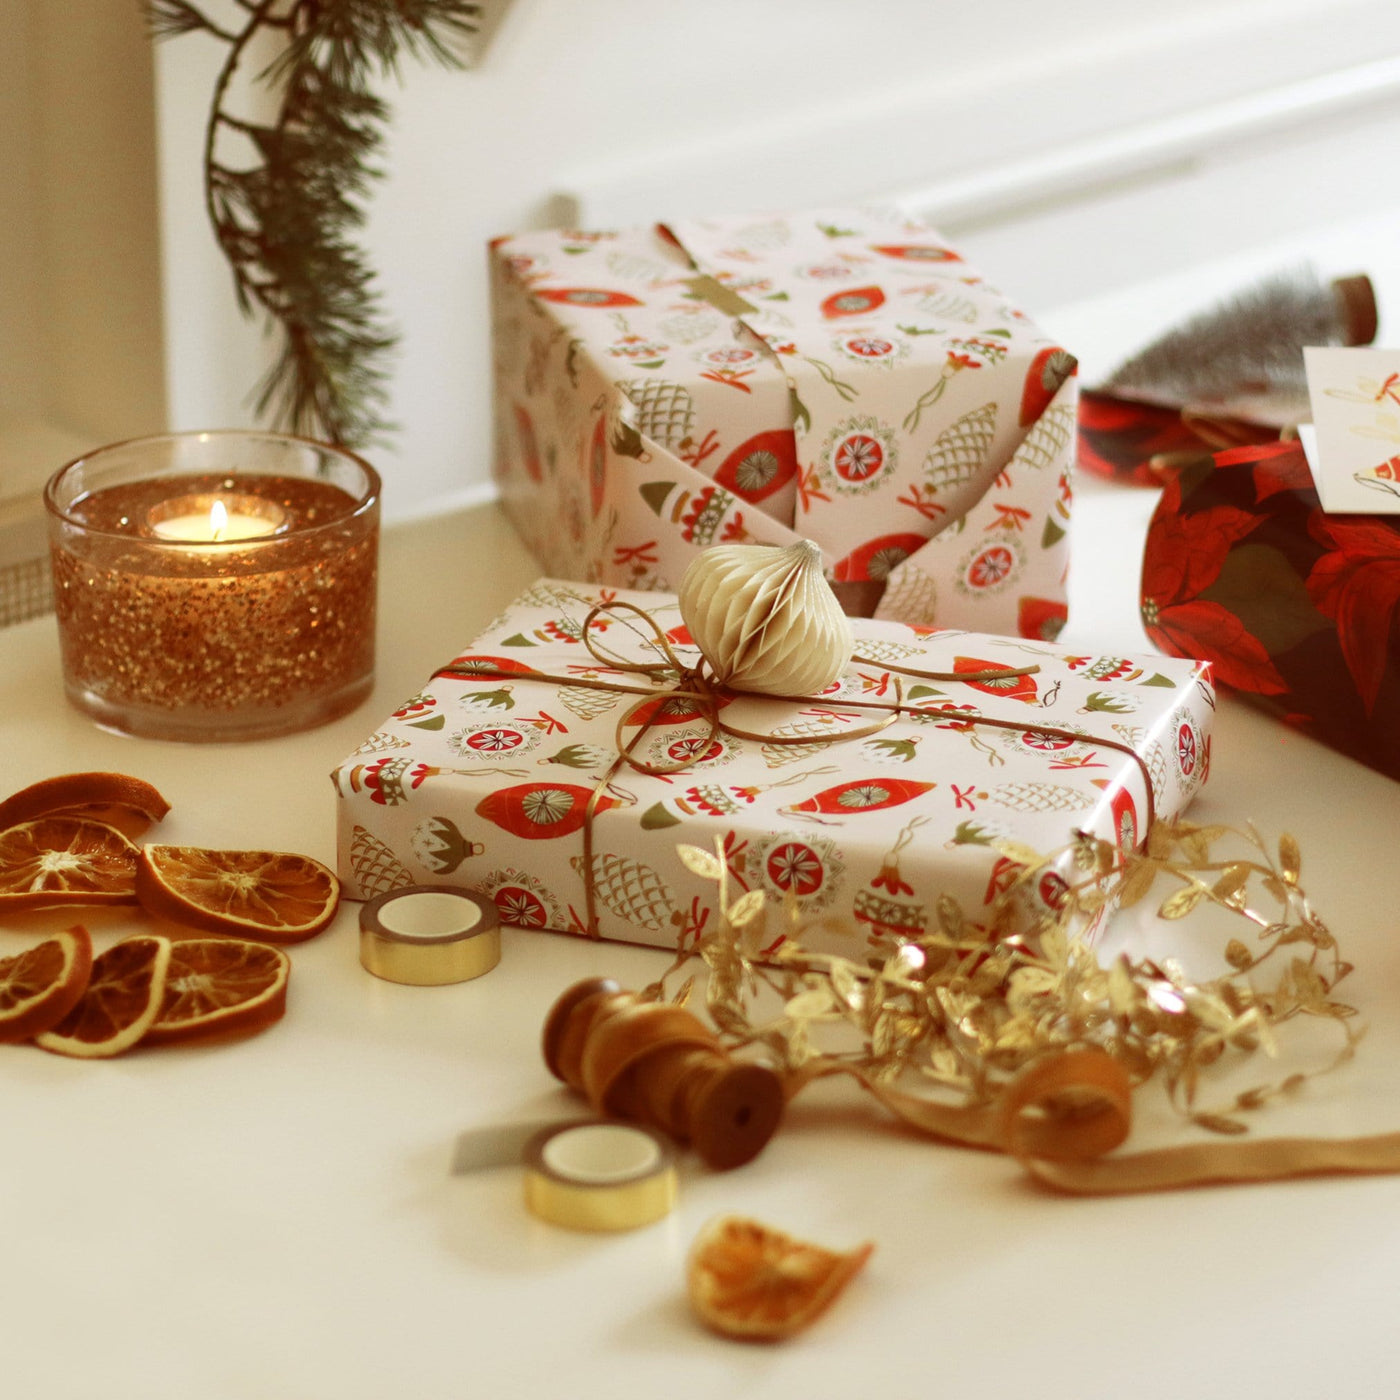 Gift Wrapped in Christmas Baubles Wrapping Paper Sheet - Annie Dornan Smith